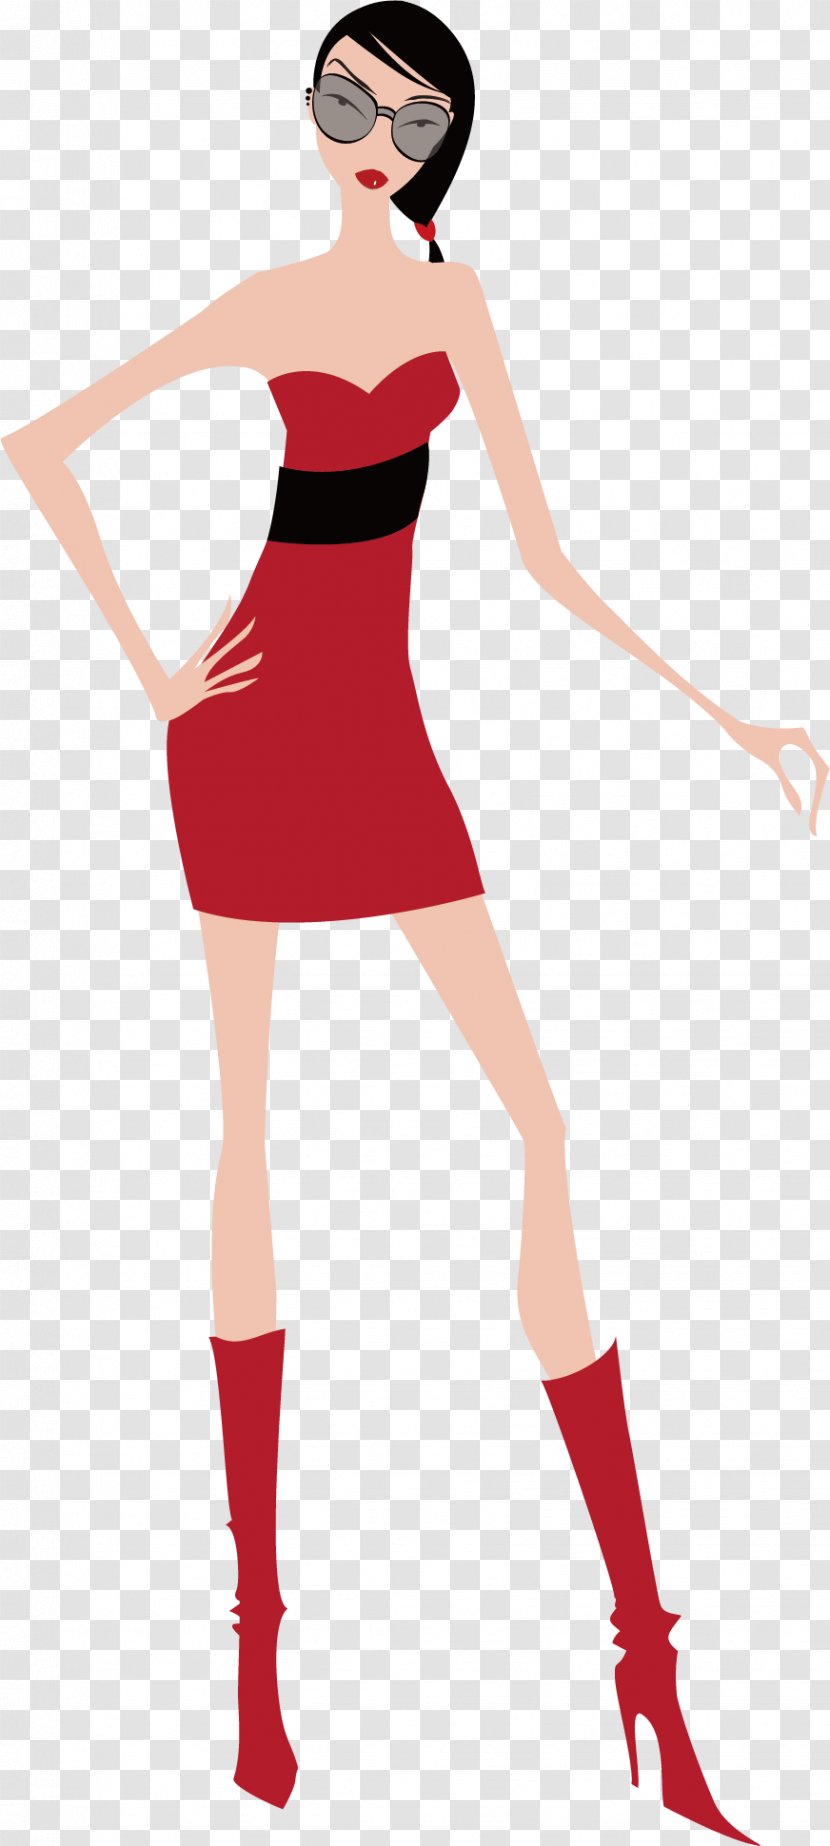 Model Illustration - Silhouette - With Sunglasses Transparent PNG